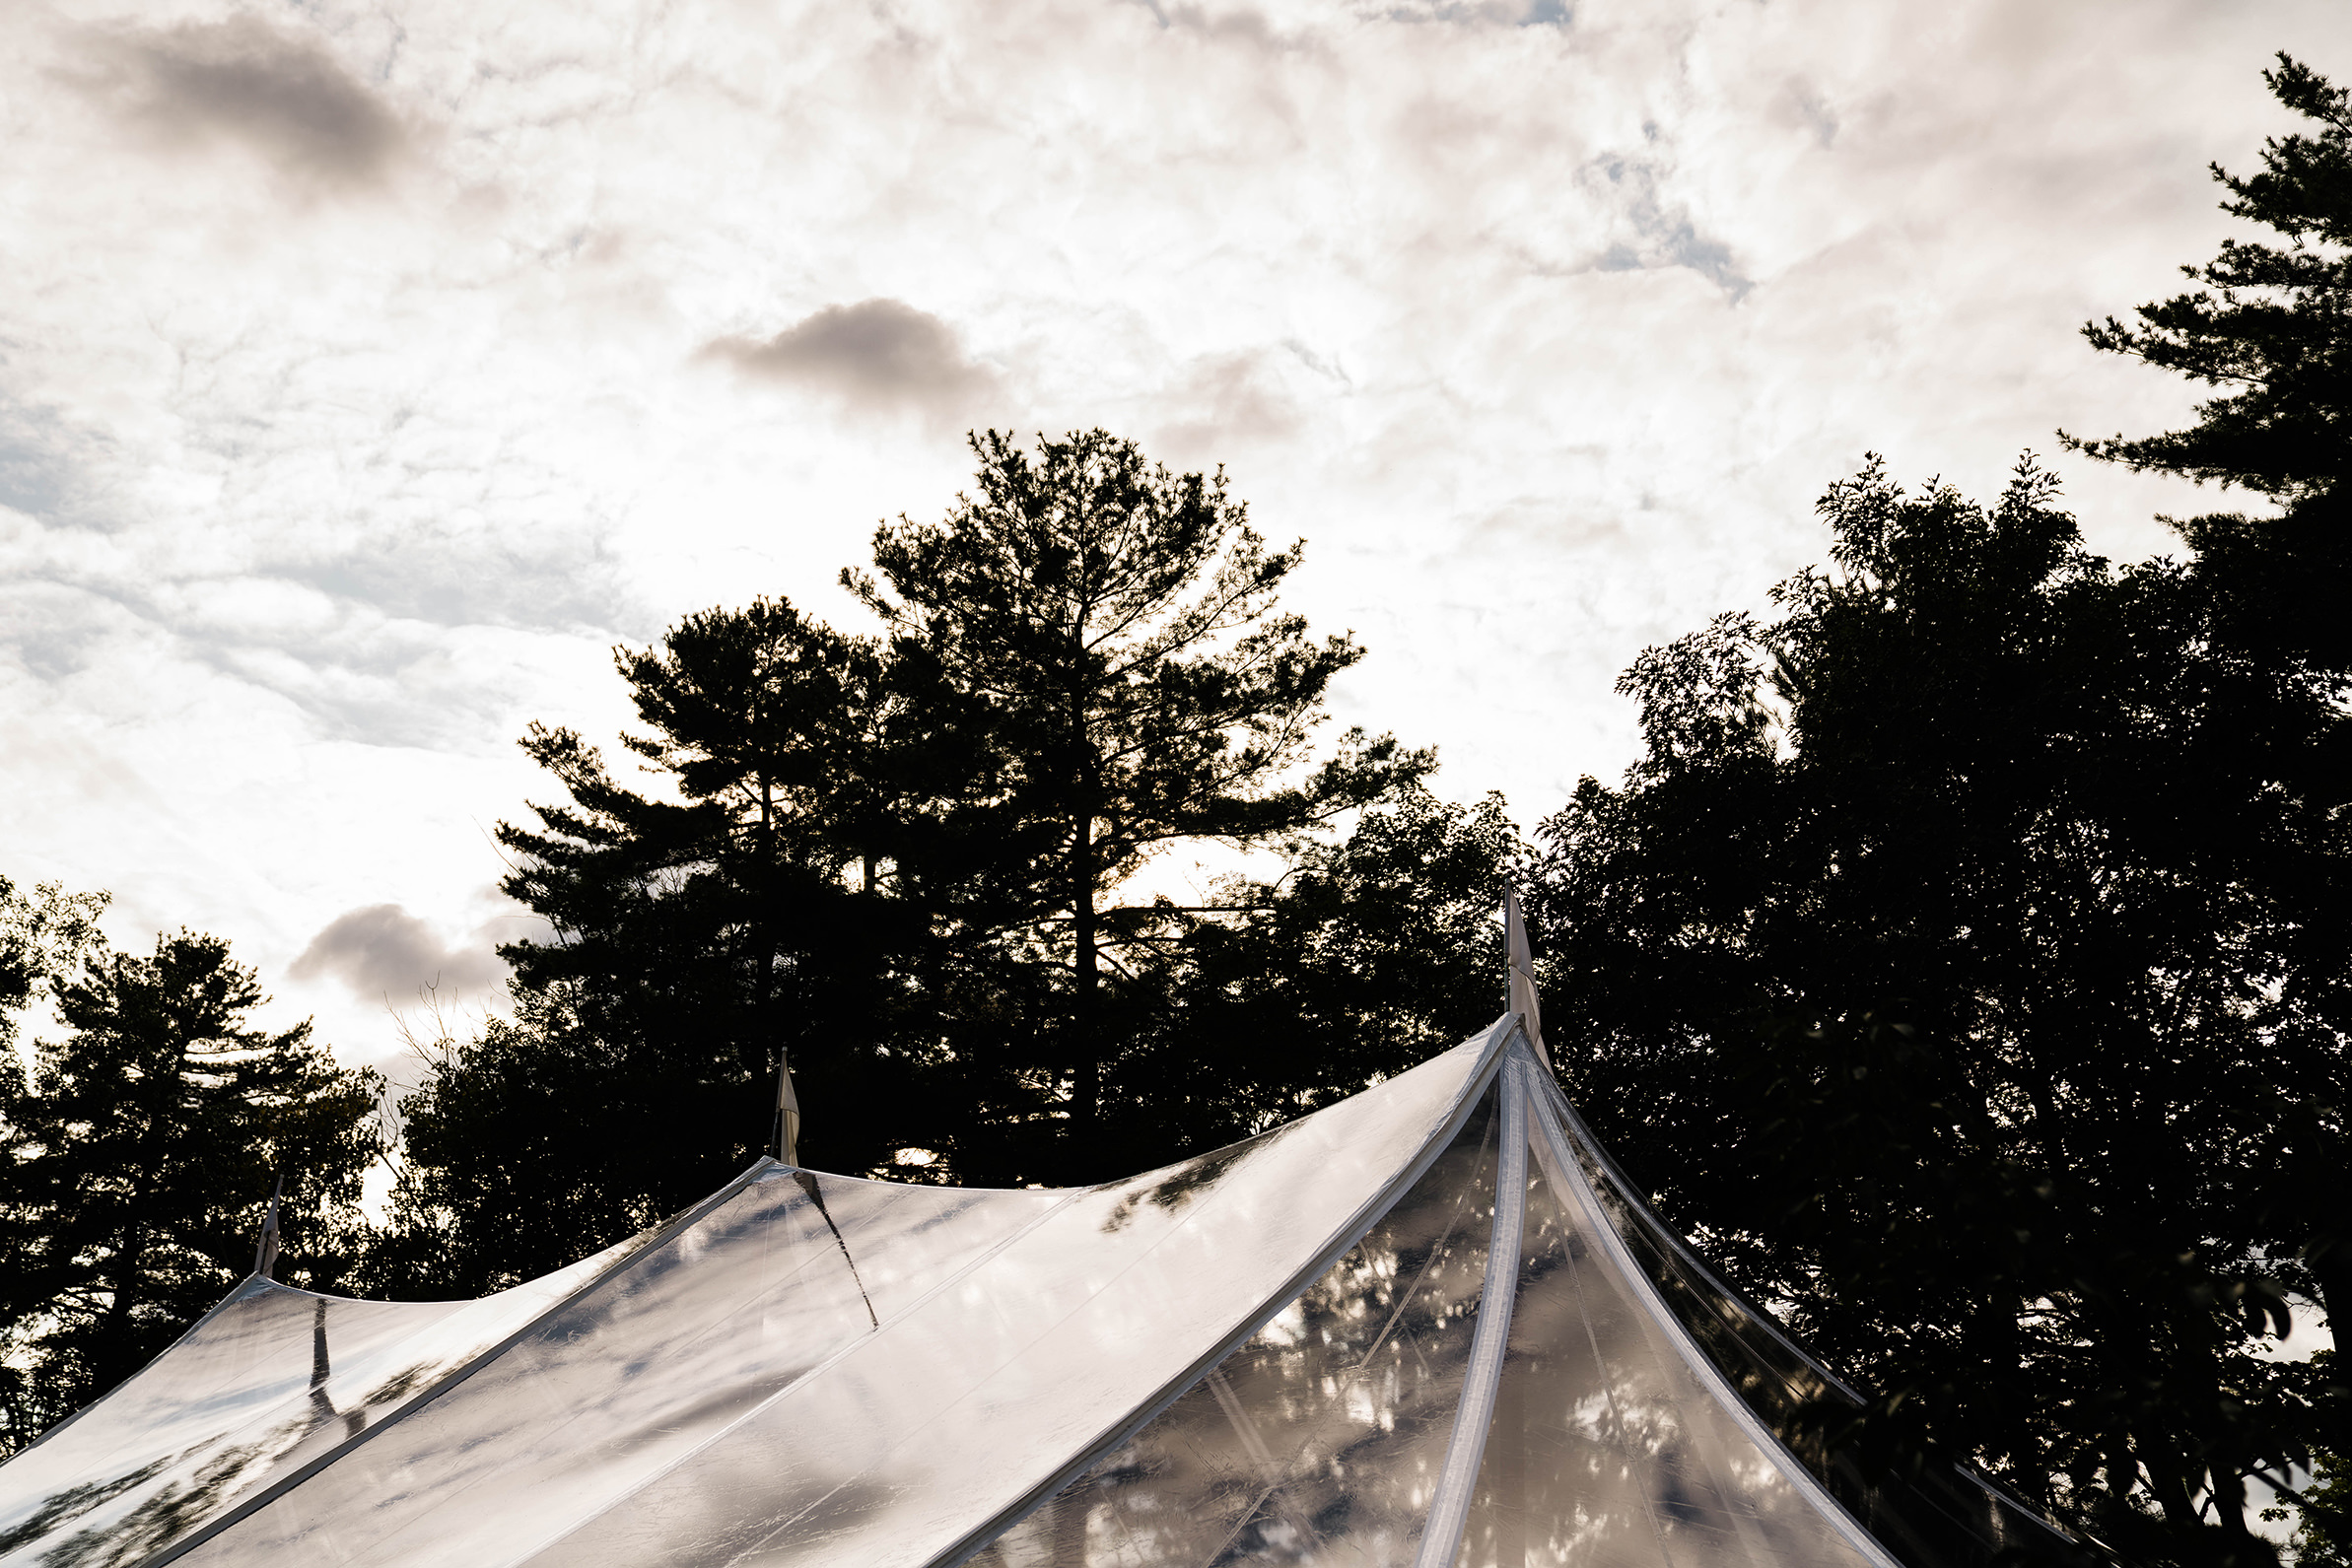 A documentary photograph featured in the best of wedding photography of 2019 showing a view of the wedding tent and the trees